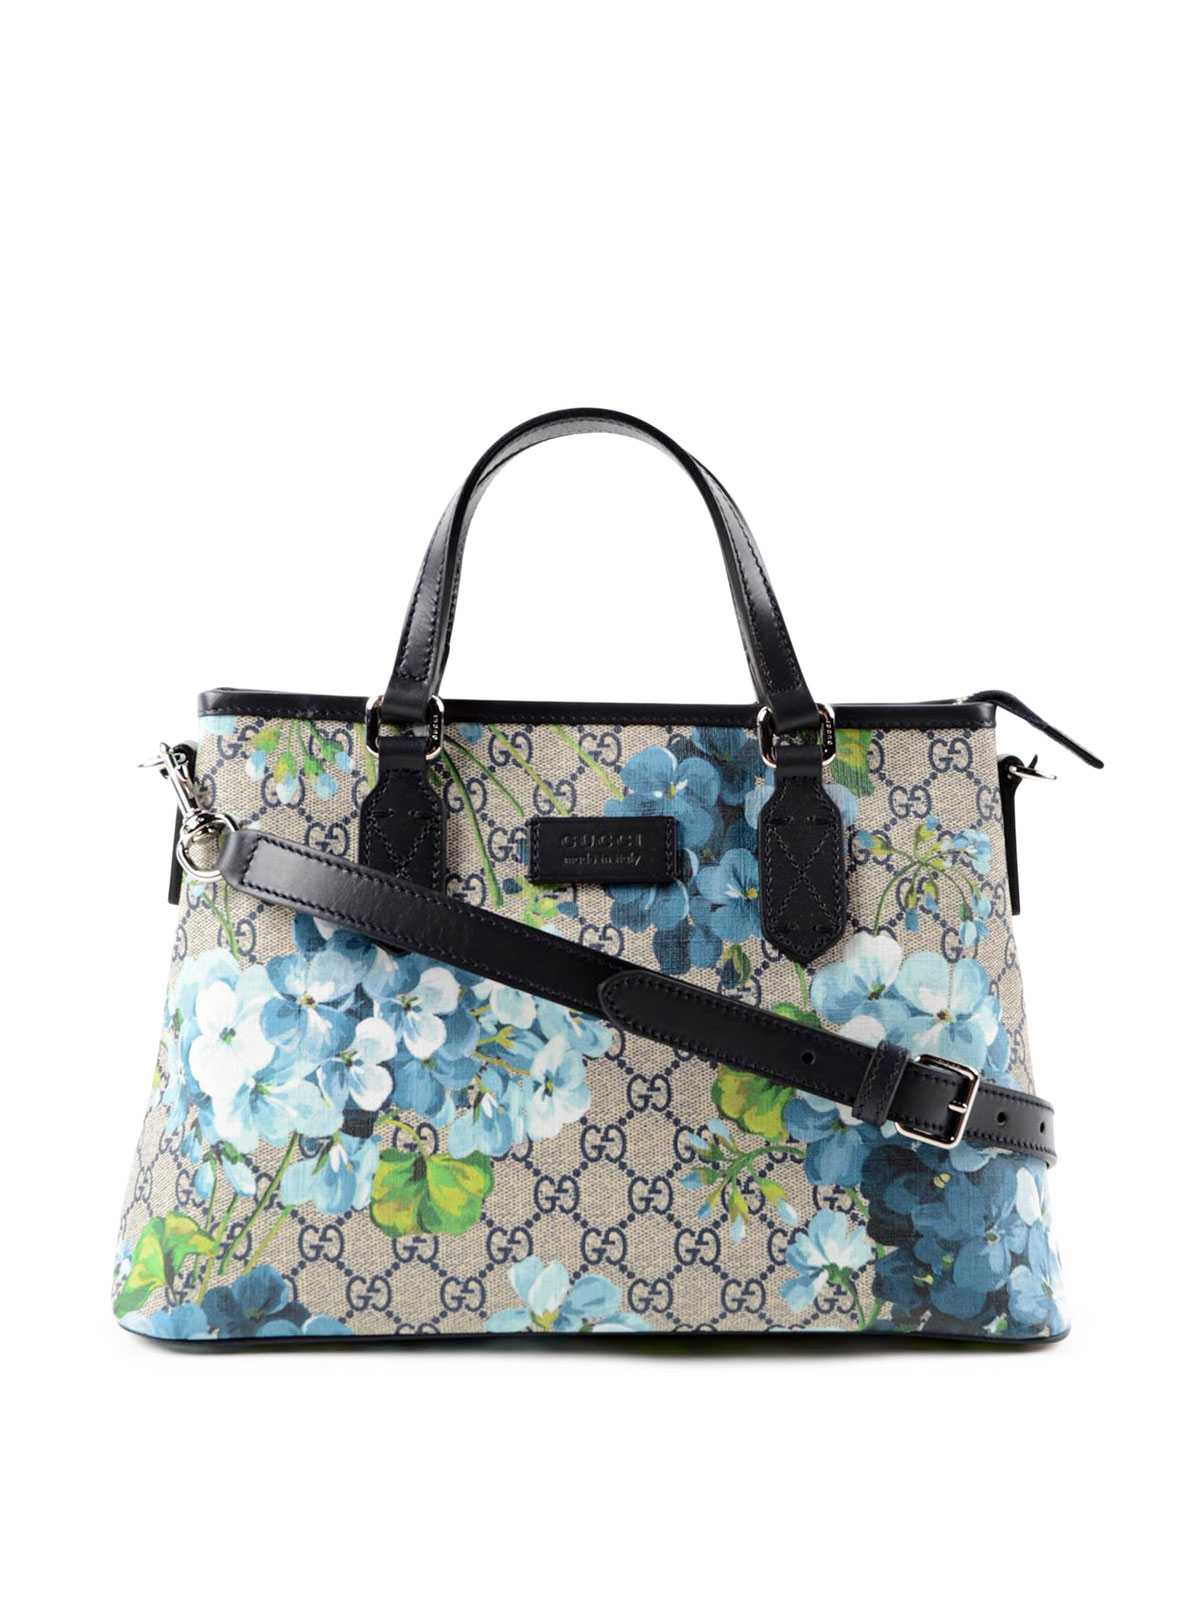 GG blooms tote by Gucci - totes bags | iKRIX